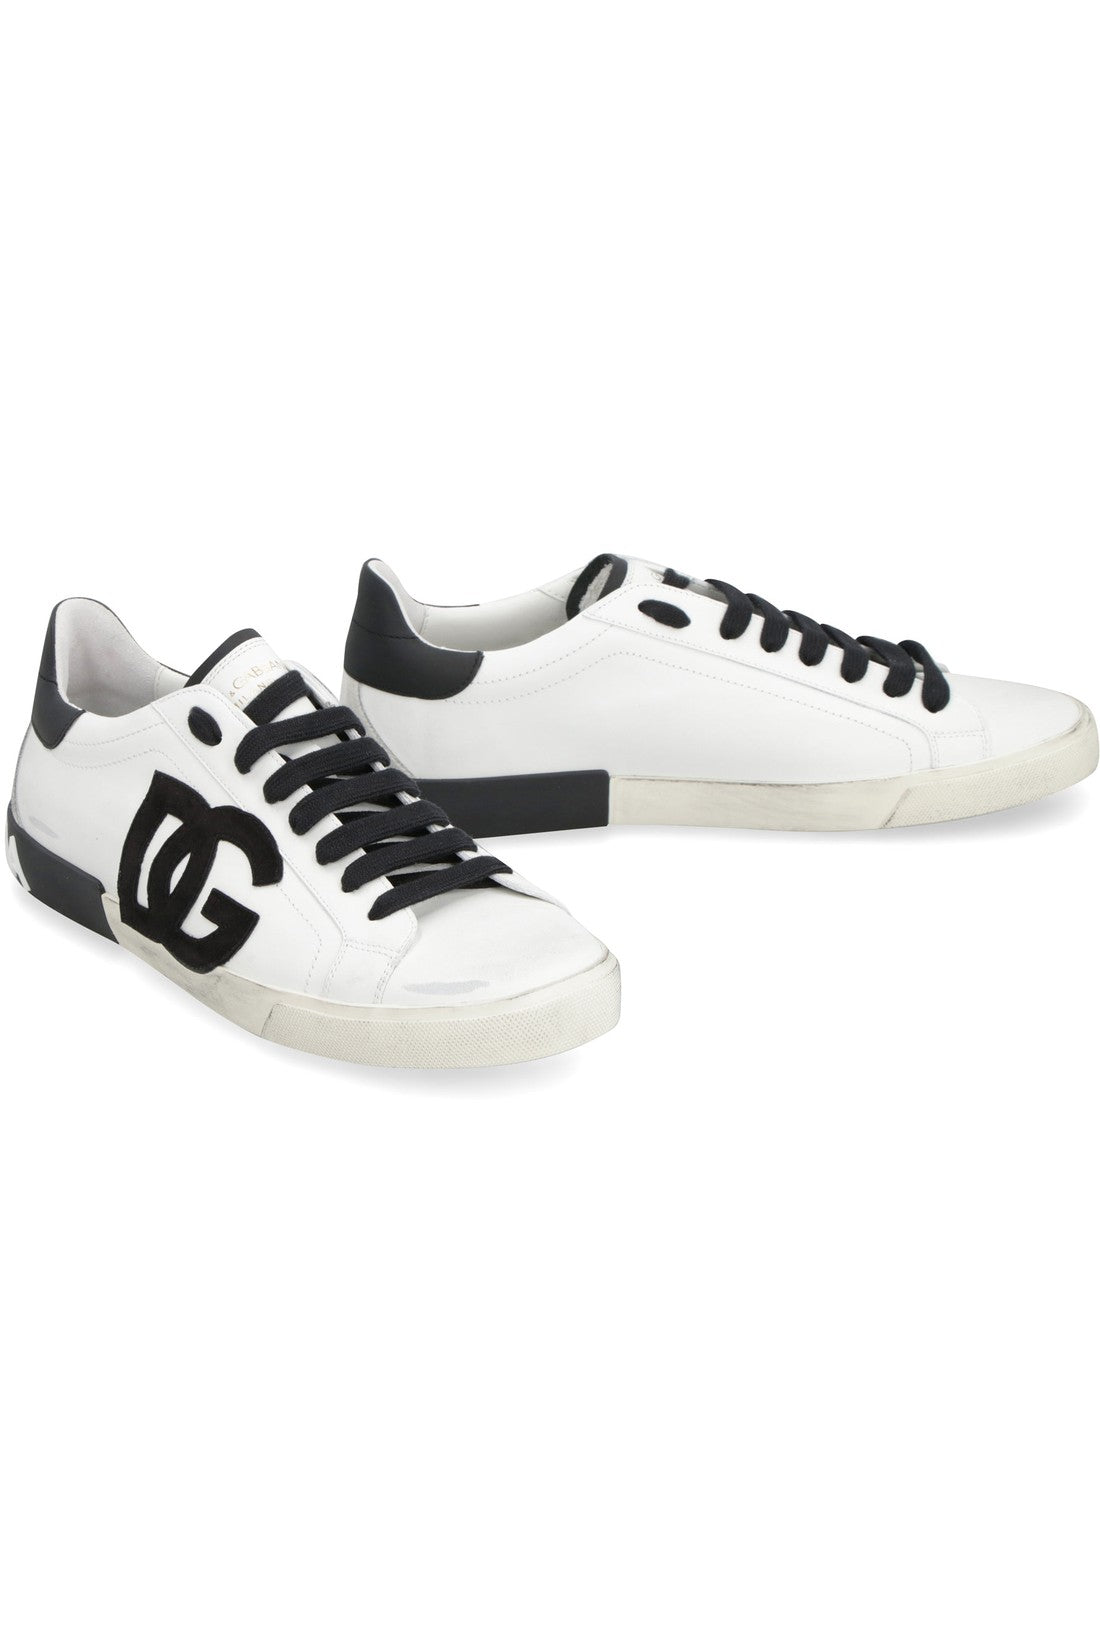 Dolce & Gabbana-OUTLET-SALE-Portofino leather low-top sneakers-ARCHIVIST